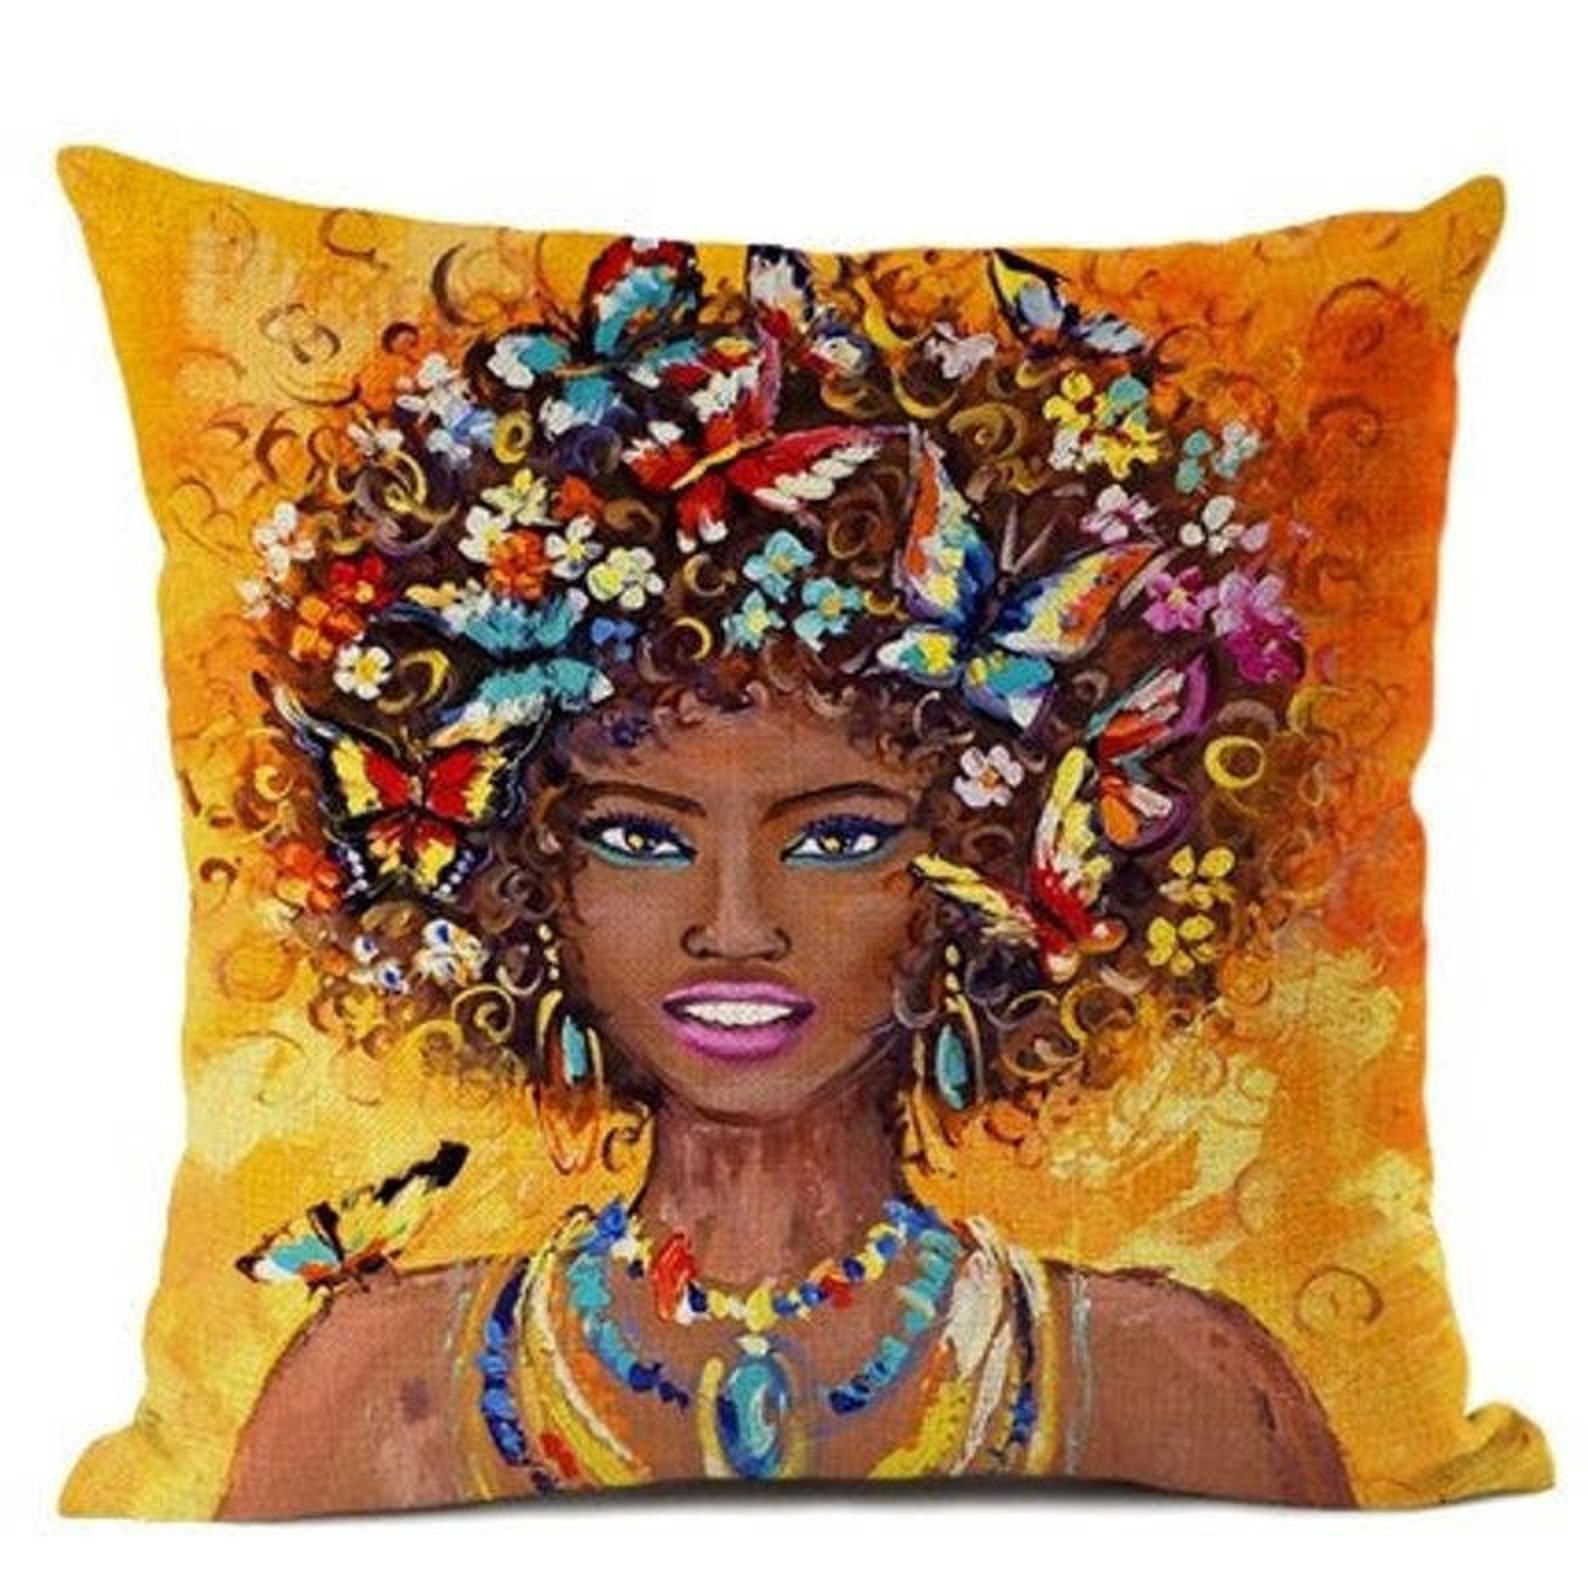 African Women Cushion Cover Afro Decor Black Girl Pillow Cover | Etsy